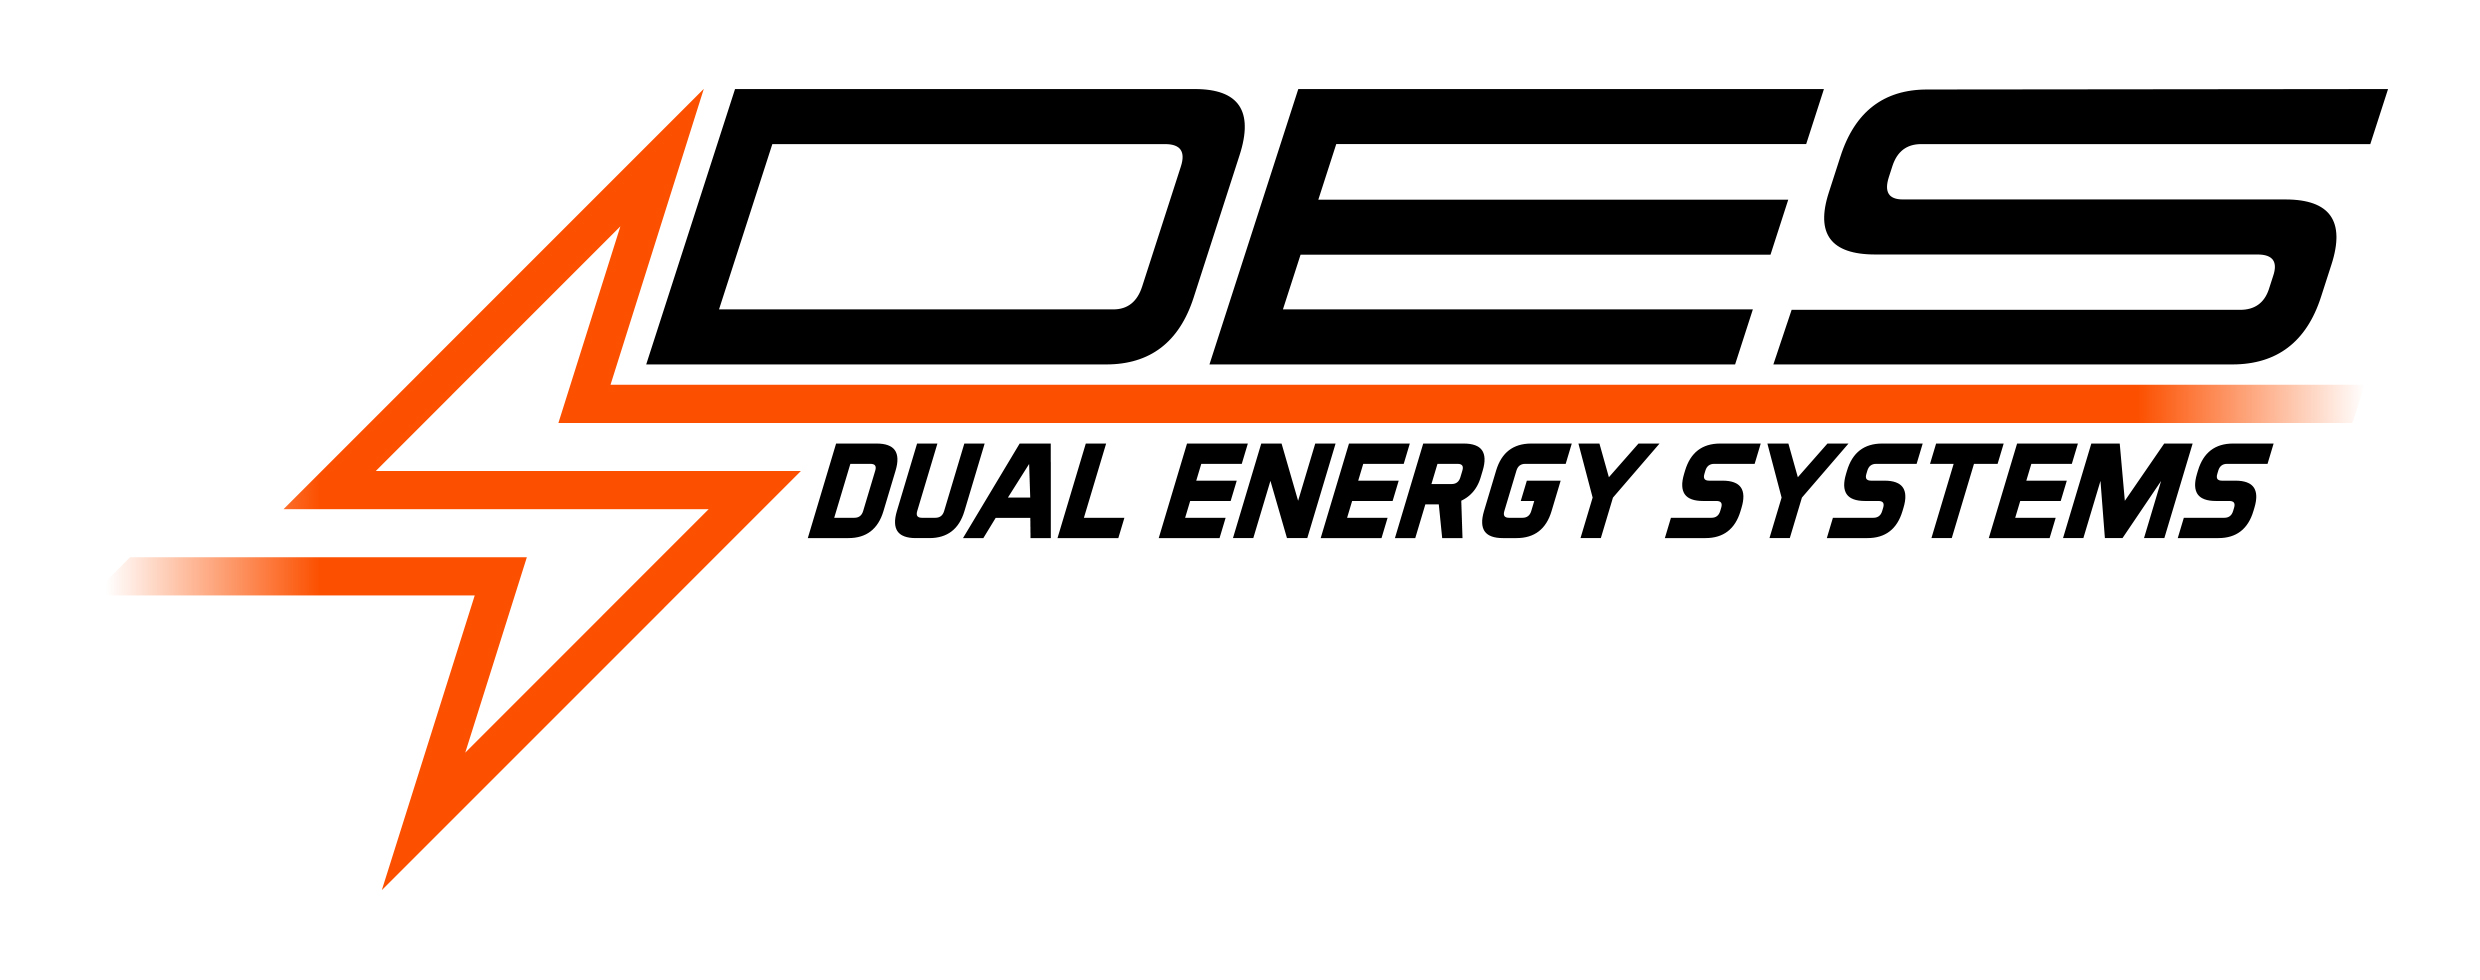 Dual Energy Systems